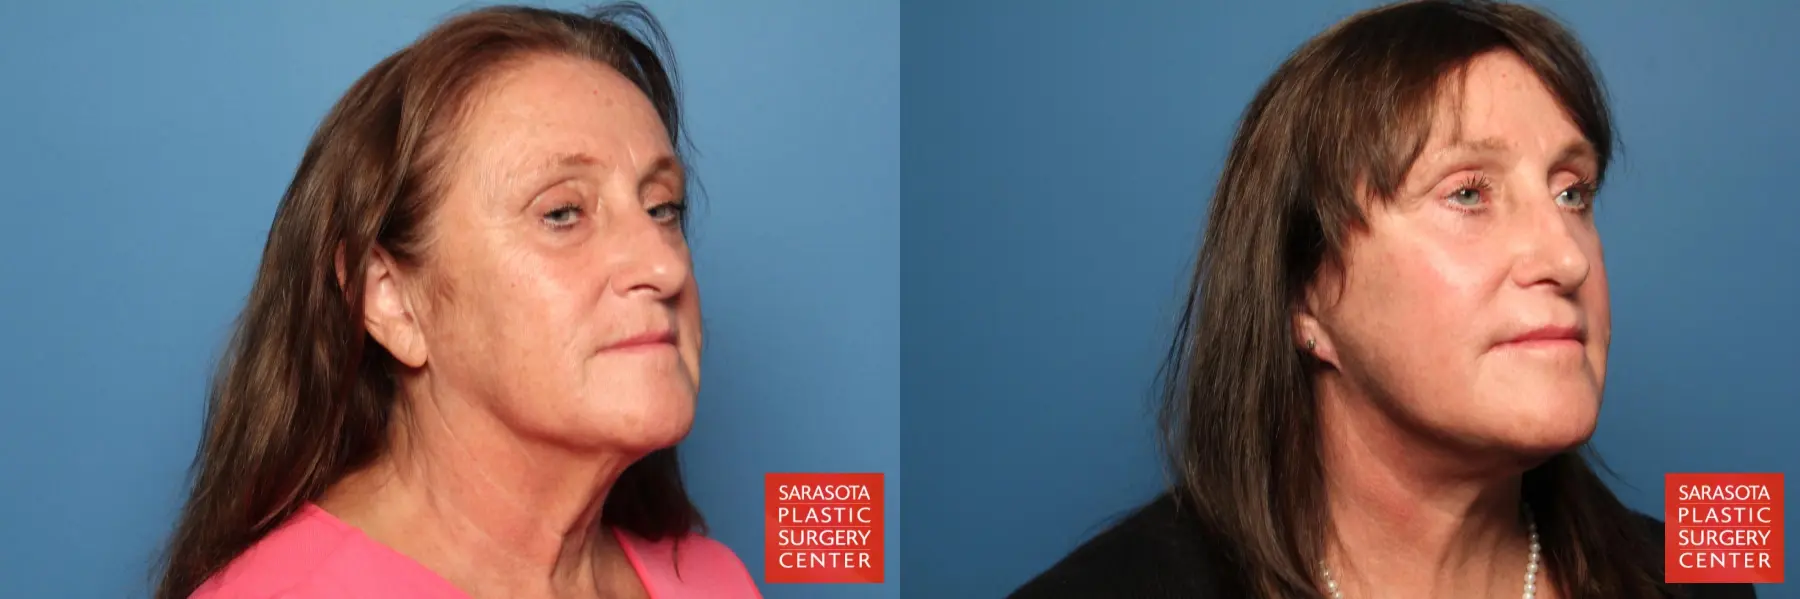 Facelift: Patient 16 - Before and After 2